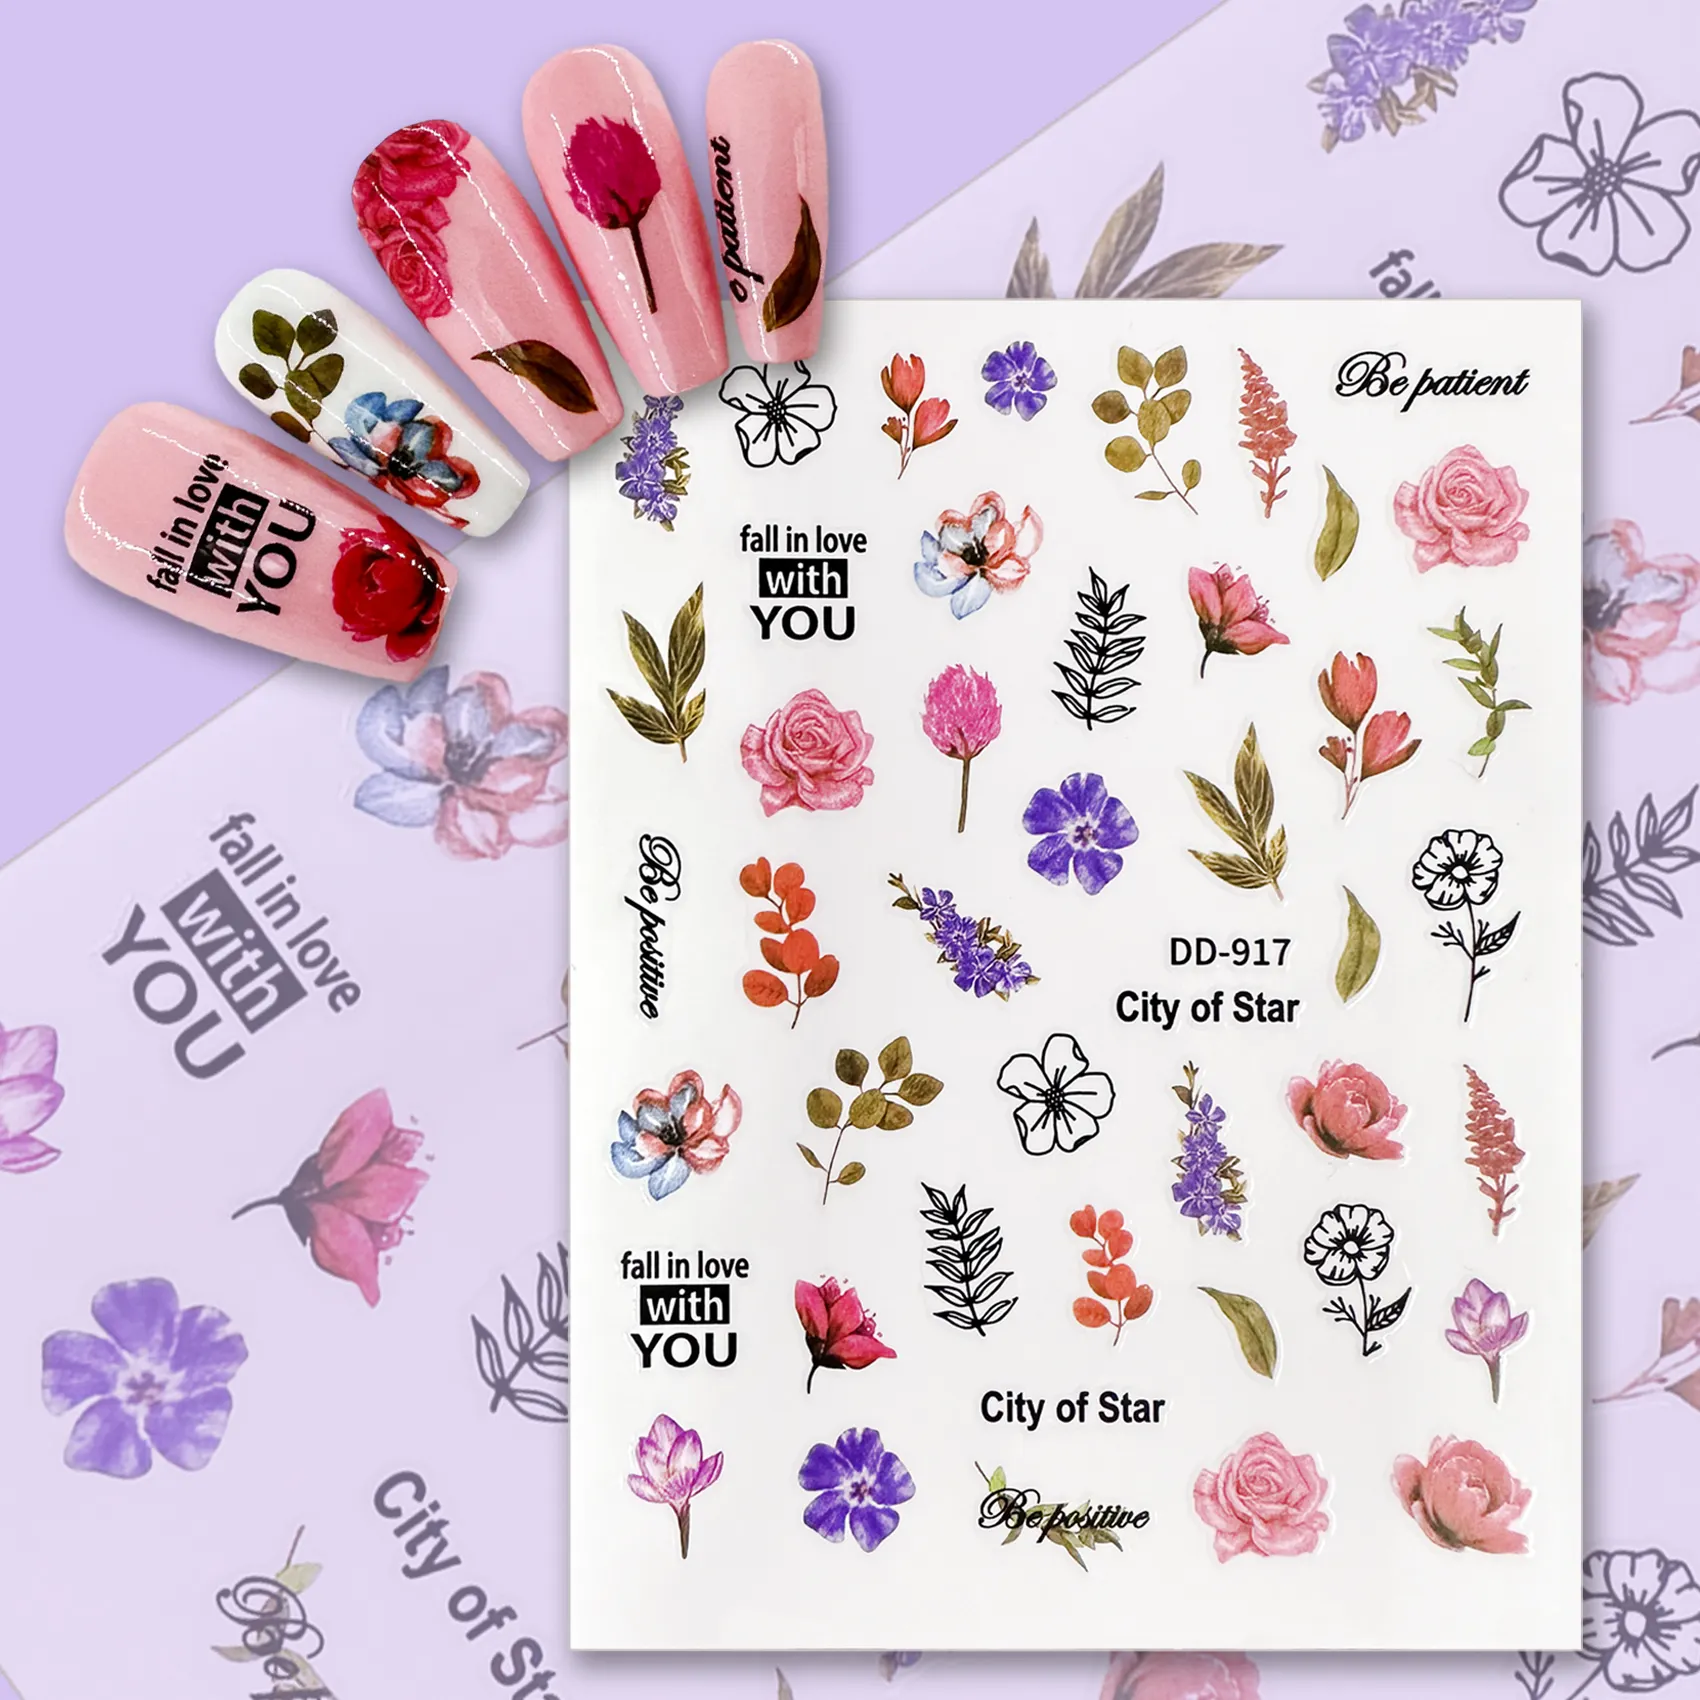 Custom Supplies Hand-painted Colorful Flowers 3D Nail Art Sticker for Manicure DIY